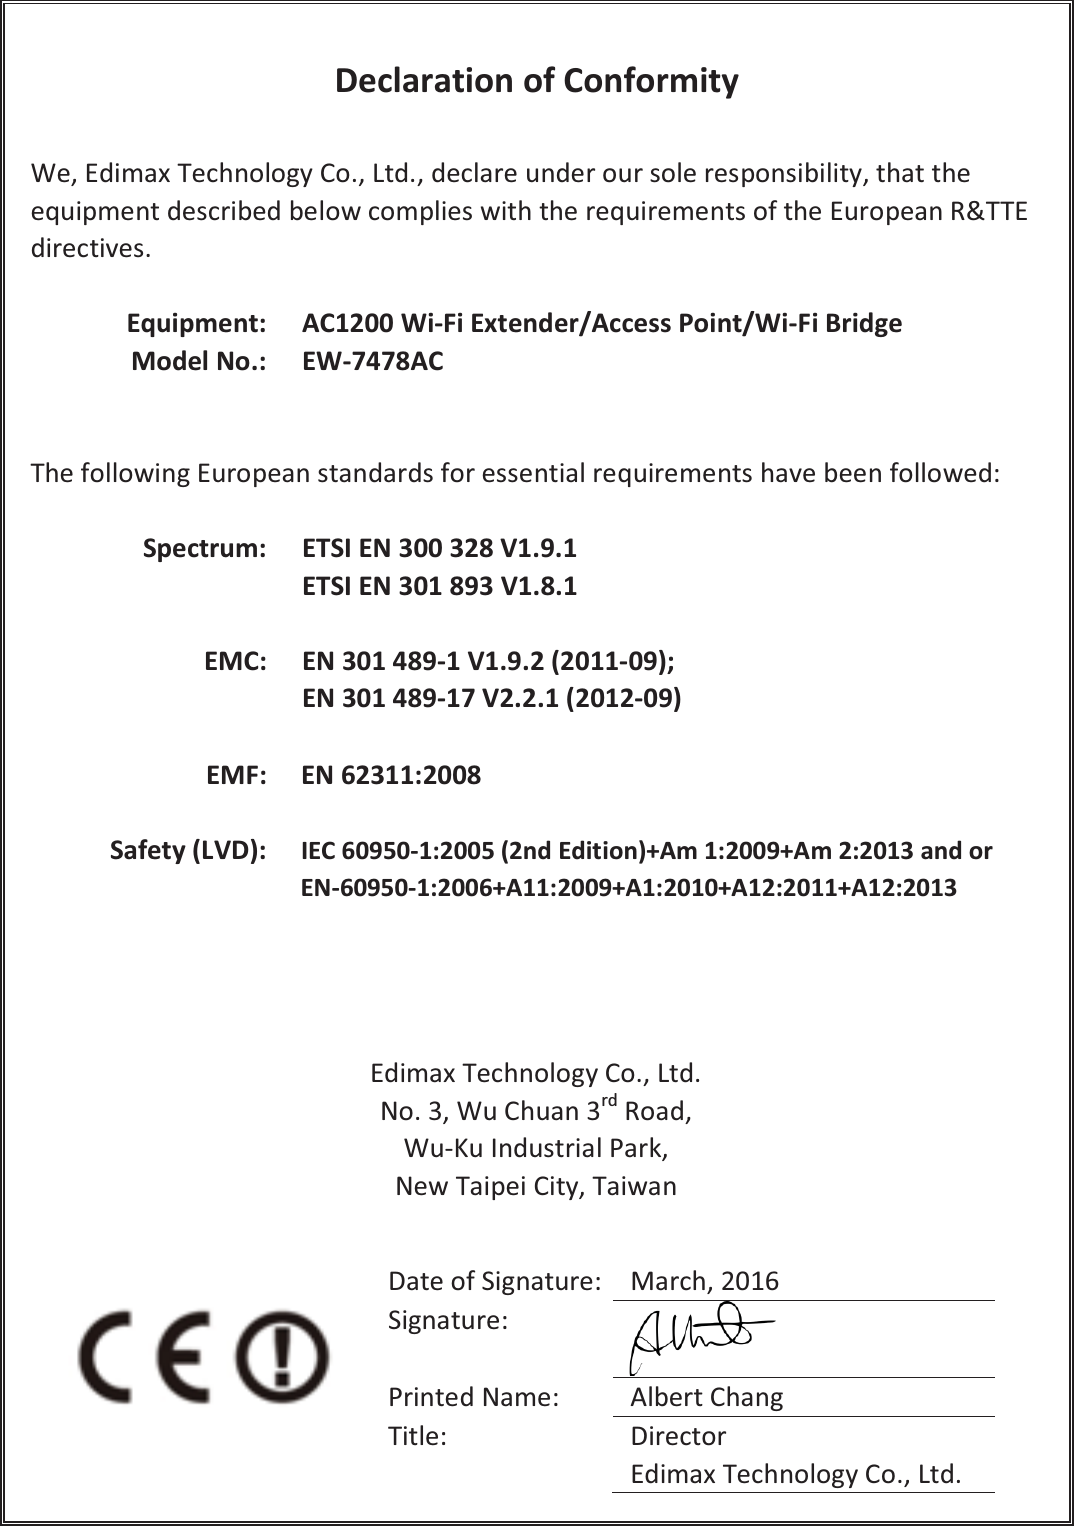  Declaration of Conformity  We, Edimax Technology Co., Ltd., declare under our sole responsibility, that the equipment described below complies with the requirements of the European R&amp;TTE directives.  Equipment: AC1200 Wi-Fi Extender/Access Point/Wi-Fi Bridge   Model No.: EW-7478AC    The following European standards for essential requirements have been followed:  Spectrum: ETSI EN 300 328 V1.9.1 ETSI EN 301 893 V1.8.1  EMC: EN 301 489-1 V1.9.2 (2011-09); EN 301 489-17 V2.2.1 (2012-09)  EMF: EN 62311:2008  Safety (LVD): IEC 60950-1:2005 (2nd Edition)+Am 1:2009+Am 2:2013 and or EN-60950-1:2006+A11:2009+A1:2010+A12:2011+A12:2013     Edimax Technology Co., Ltd. No. 3, Wu Chuan 3rd Road, Wu-Ku Industrial Park, New Taipei City, Taiwan     Date of Signature: March, 2016 Signature:  Printed Name: Albert Chang Title: Director Edimax Technology Co., Ltd. 